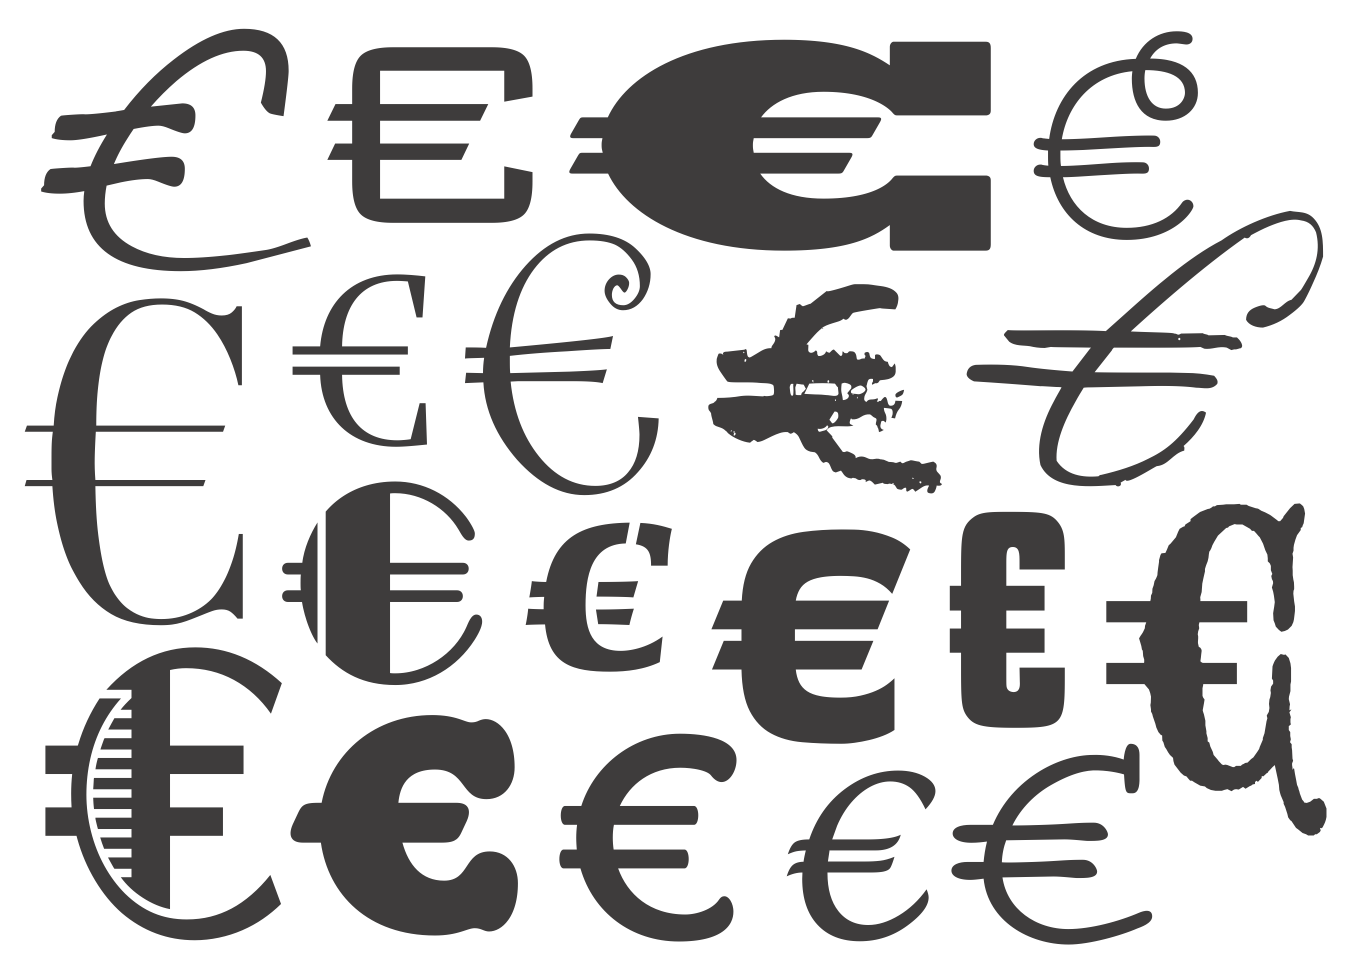 Design a new character for a typeface